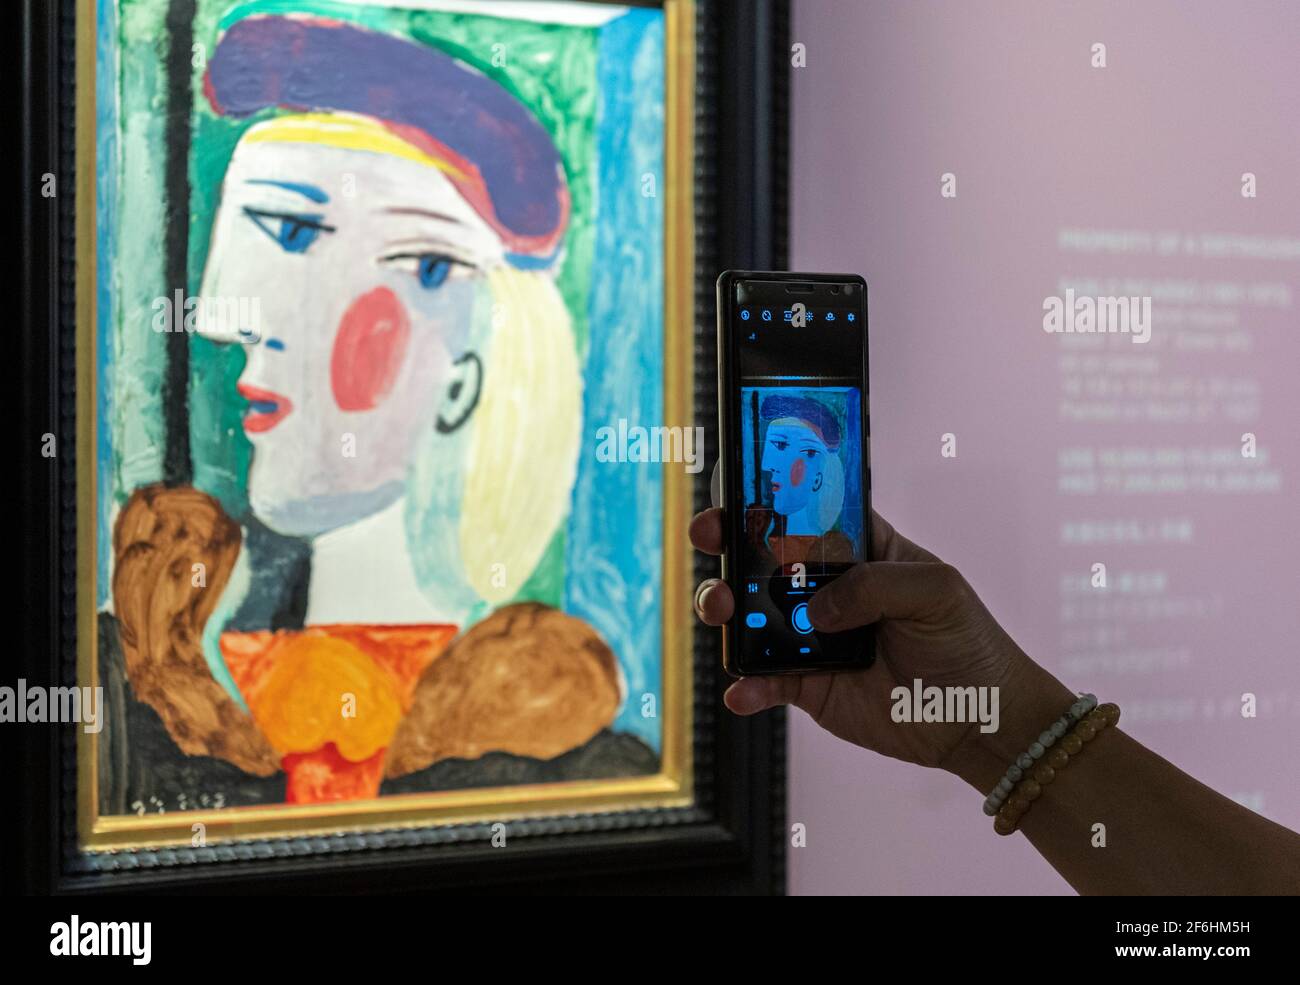 April 1, 2021, Hong Kong, Hong Kong, China: Cristina Wang, specialist in Modern and Contemporary Art adjusts the Pablo Picassoâ€™ painting â€œFemme au BÃ©ret Mauveâ€ on display at the Bonham Gallery in Admiralty Hong Kong ahead of its sale in New York in May 2021. The painting o f Picassoâ€™s greatest muse Mare-ThÃ©rÃ¨se Walter is on a world tour to attract buyers having been in London and Paris ahead of Hong Kong. A price of $15 million USD is estimated for the masterpiece. (Credit Image: © Jayne Russell/ZUMA Wire) Stock Photo